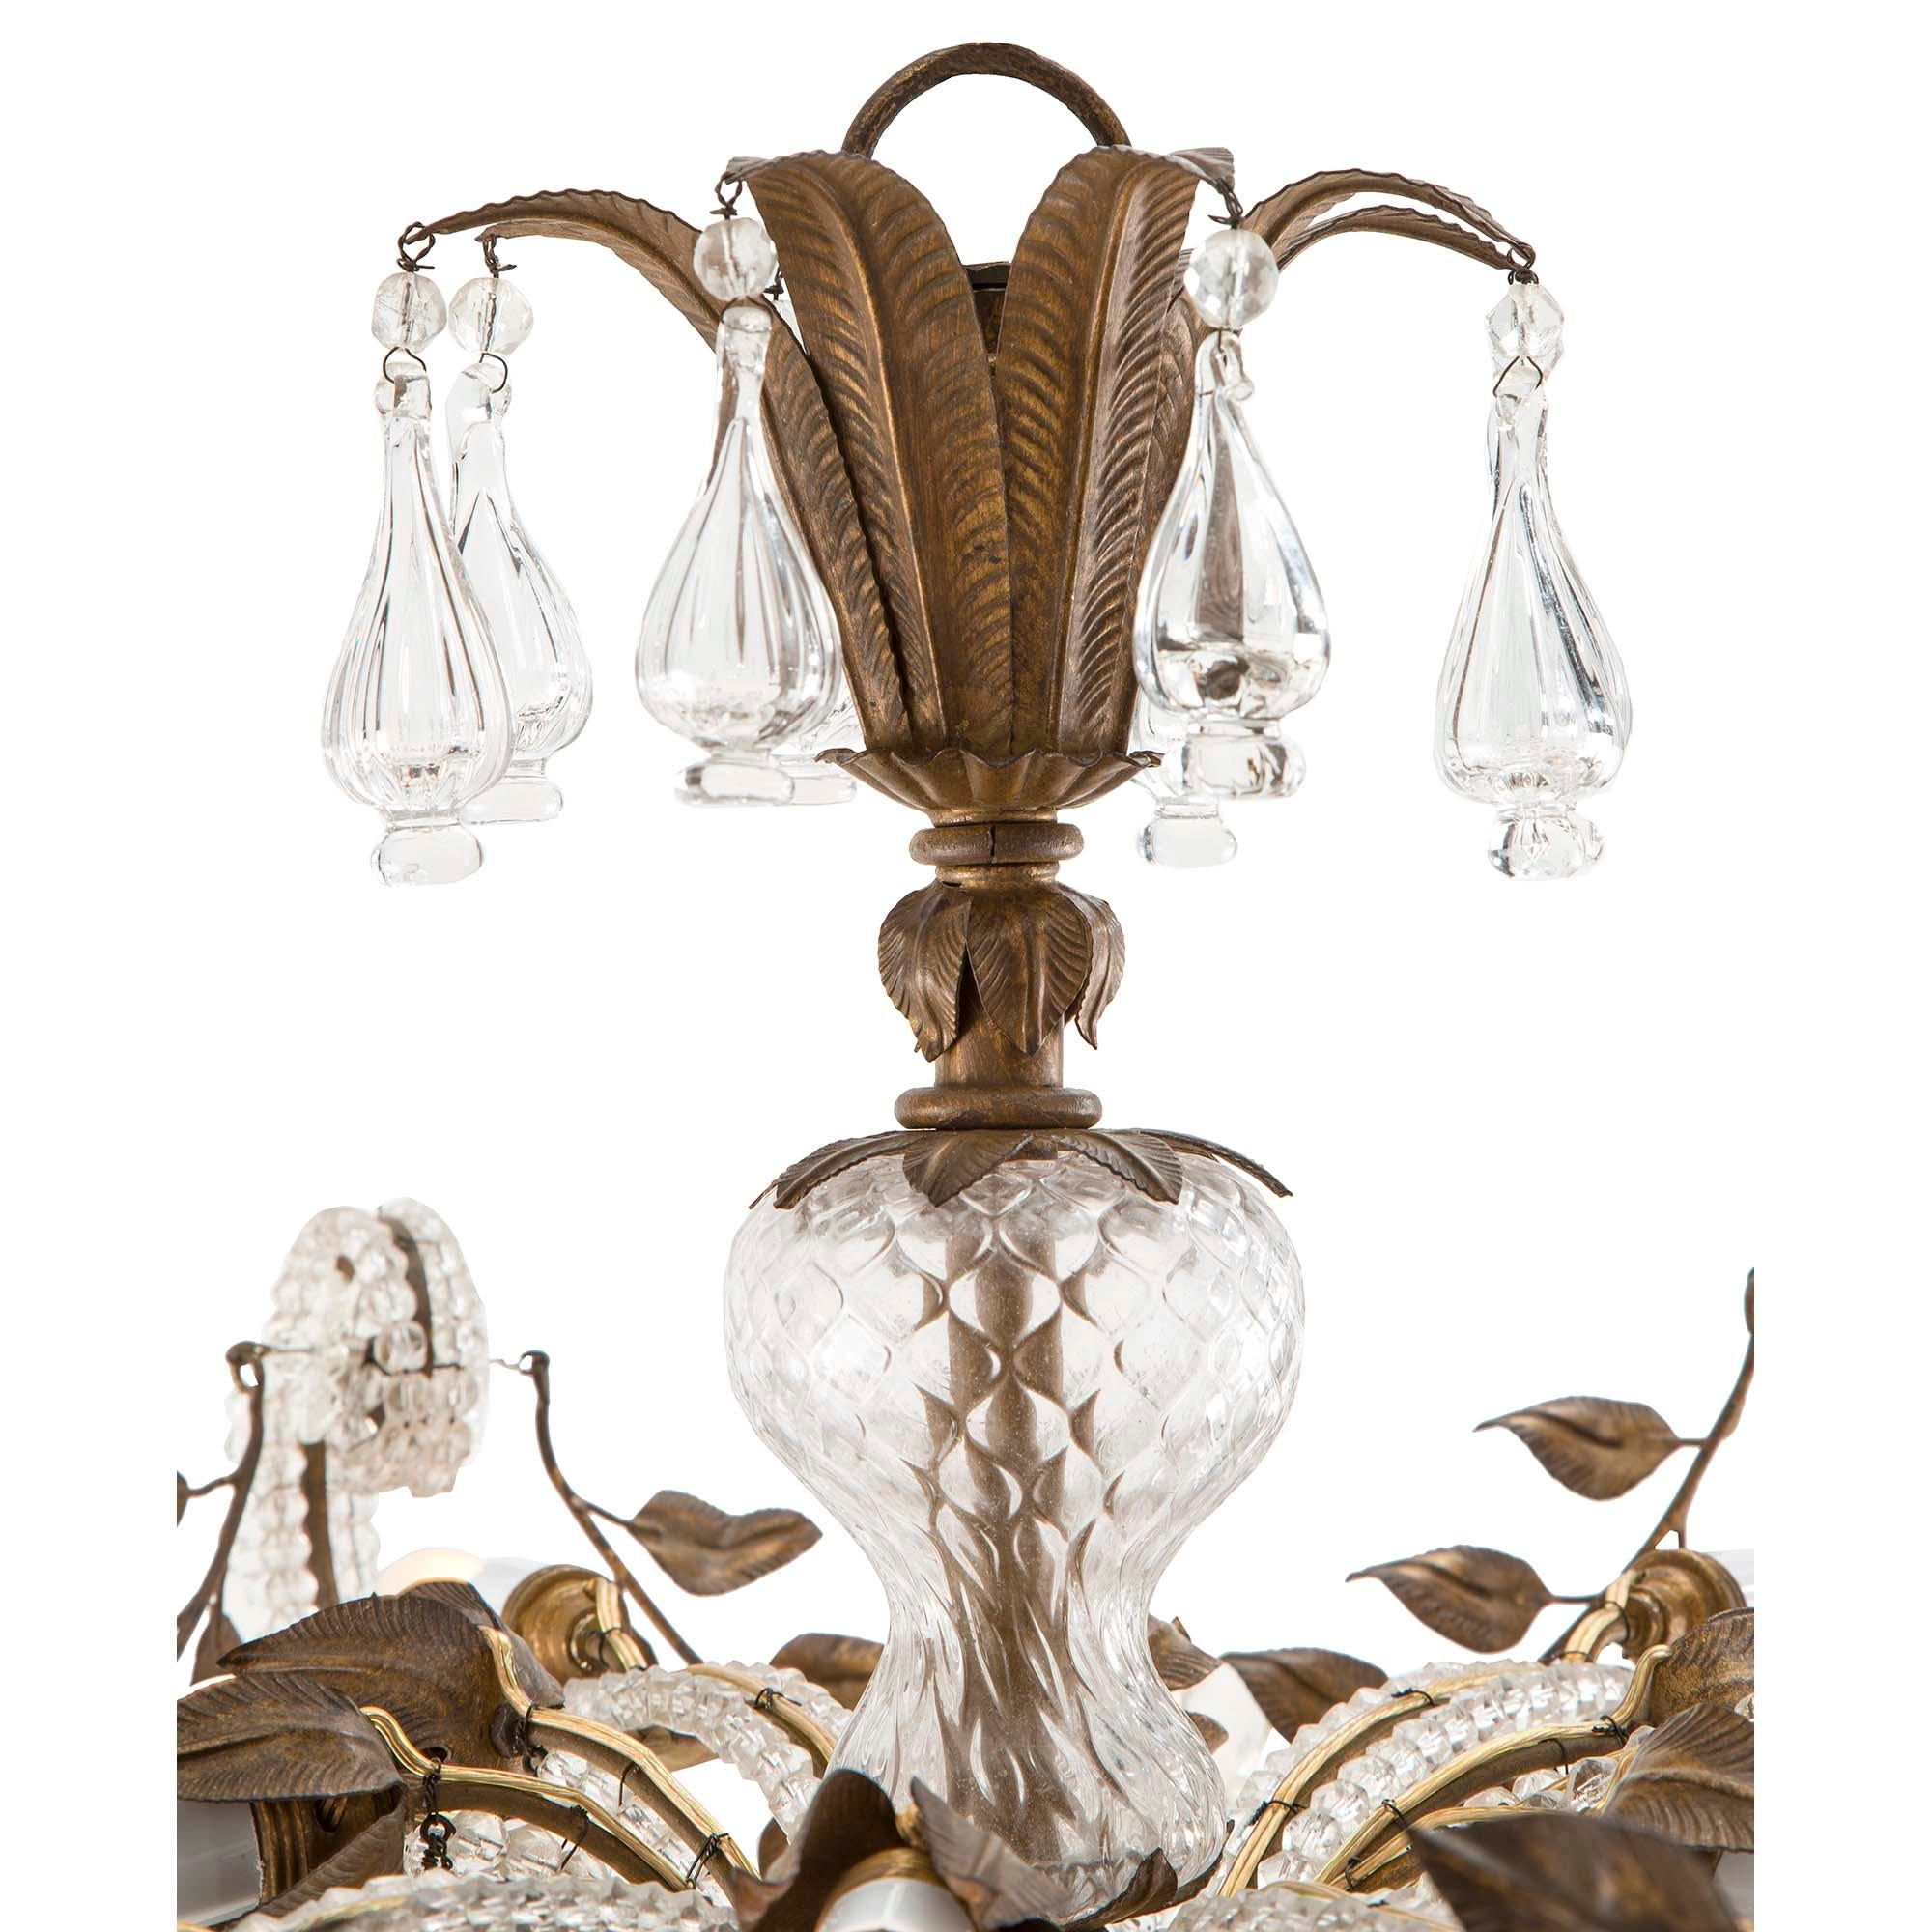 A very unique and attractive Italian late 19th century Louis XV st. glass and tole chandelier. This twelve light chandelier has a tole inverted blossom finial base with leaves and a central glass pendant. Six scrolled lighted arms are decorated with